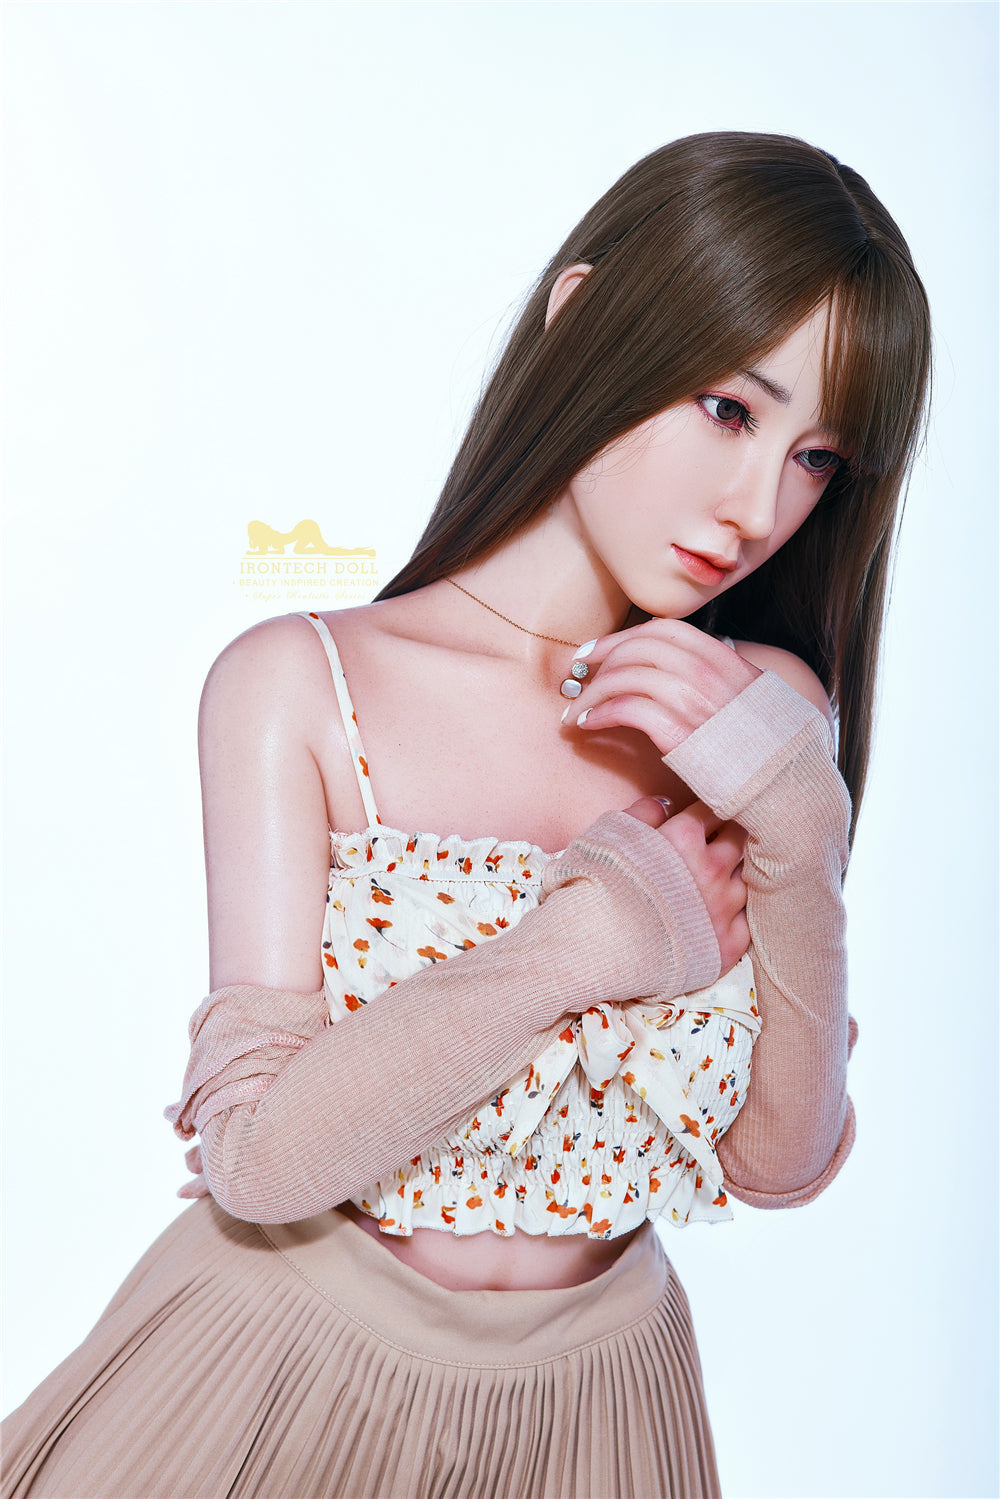 Irontech - Silicone Realistic Love Doll - 5ft 1in (153cm) - Hannah - Love Dolls 4U